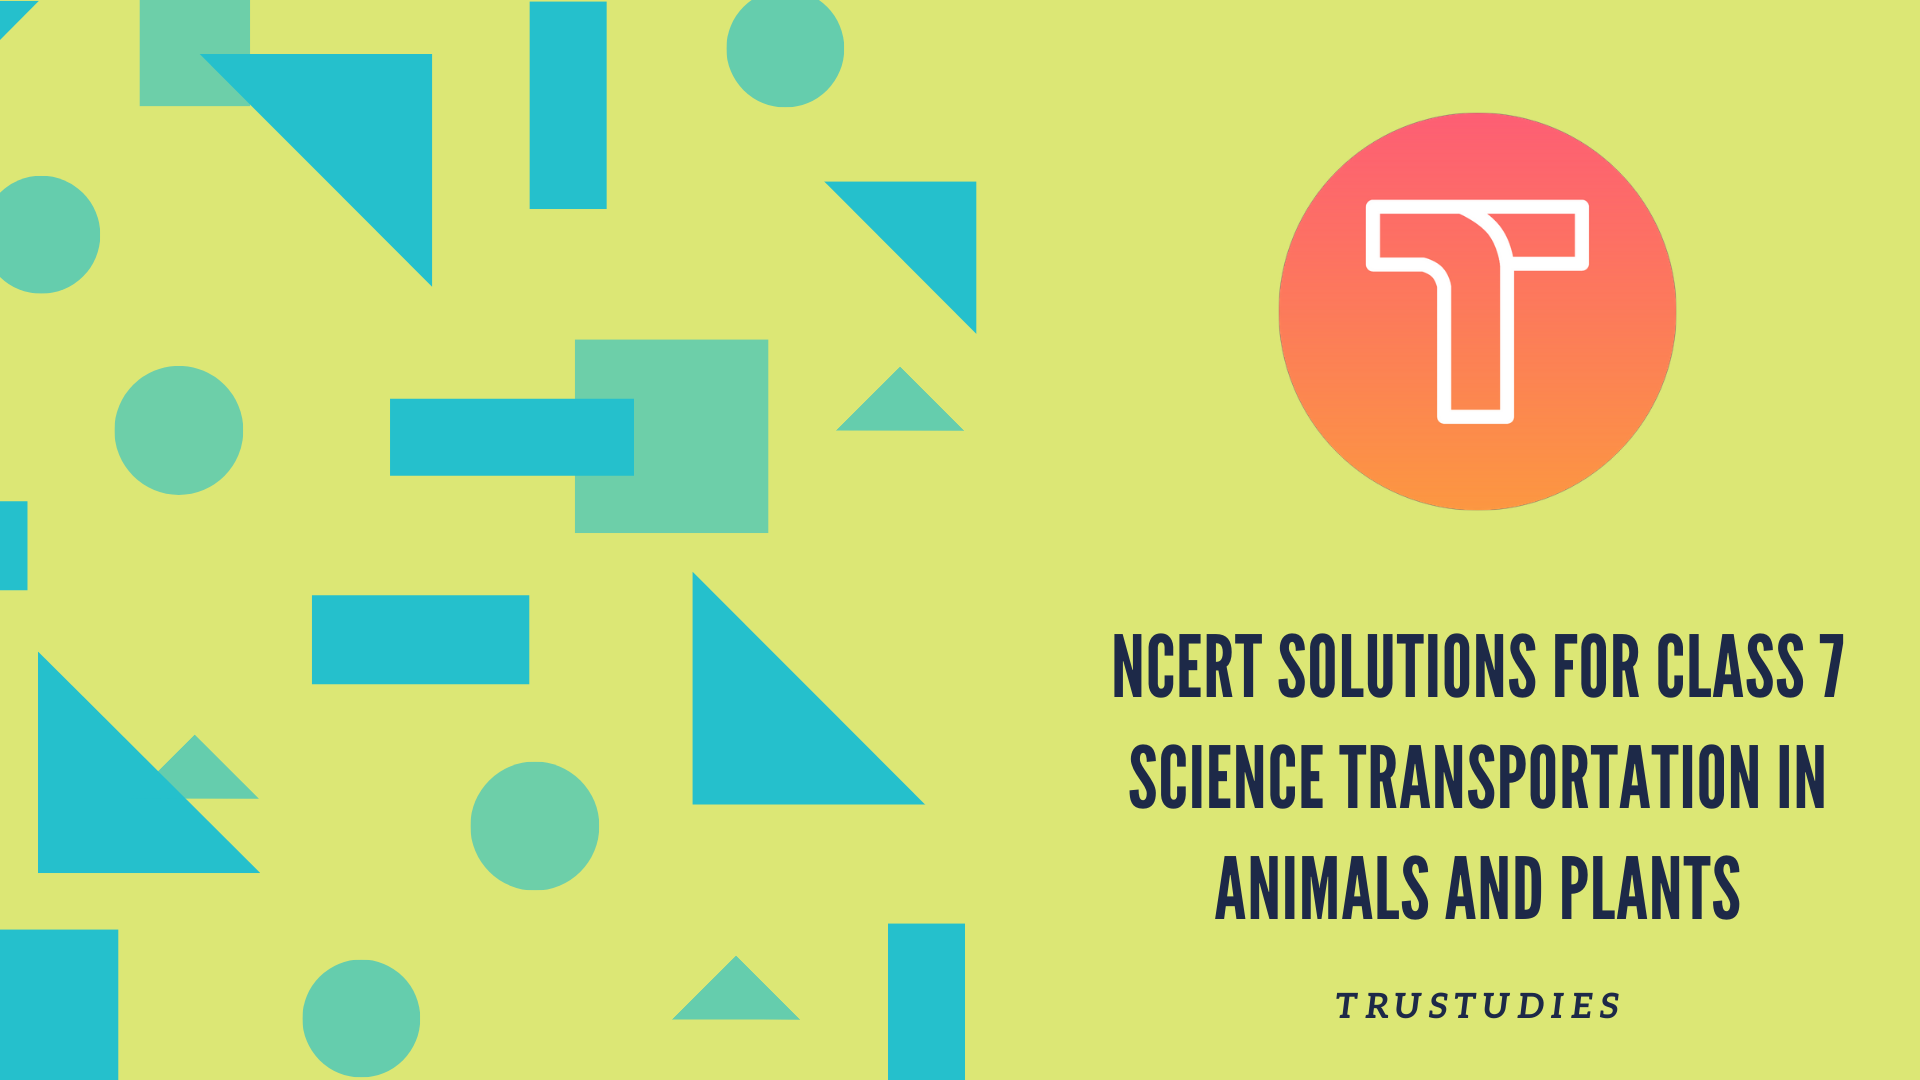 NCERT solutions for class 7 science chapter 11 transportation in animals and plants banner image